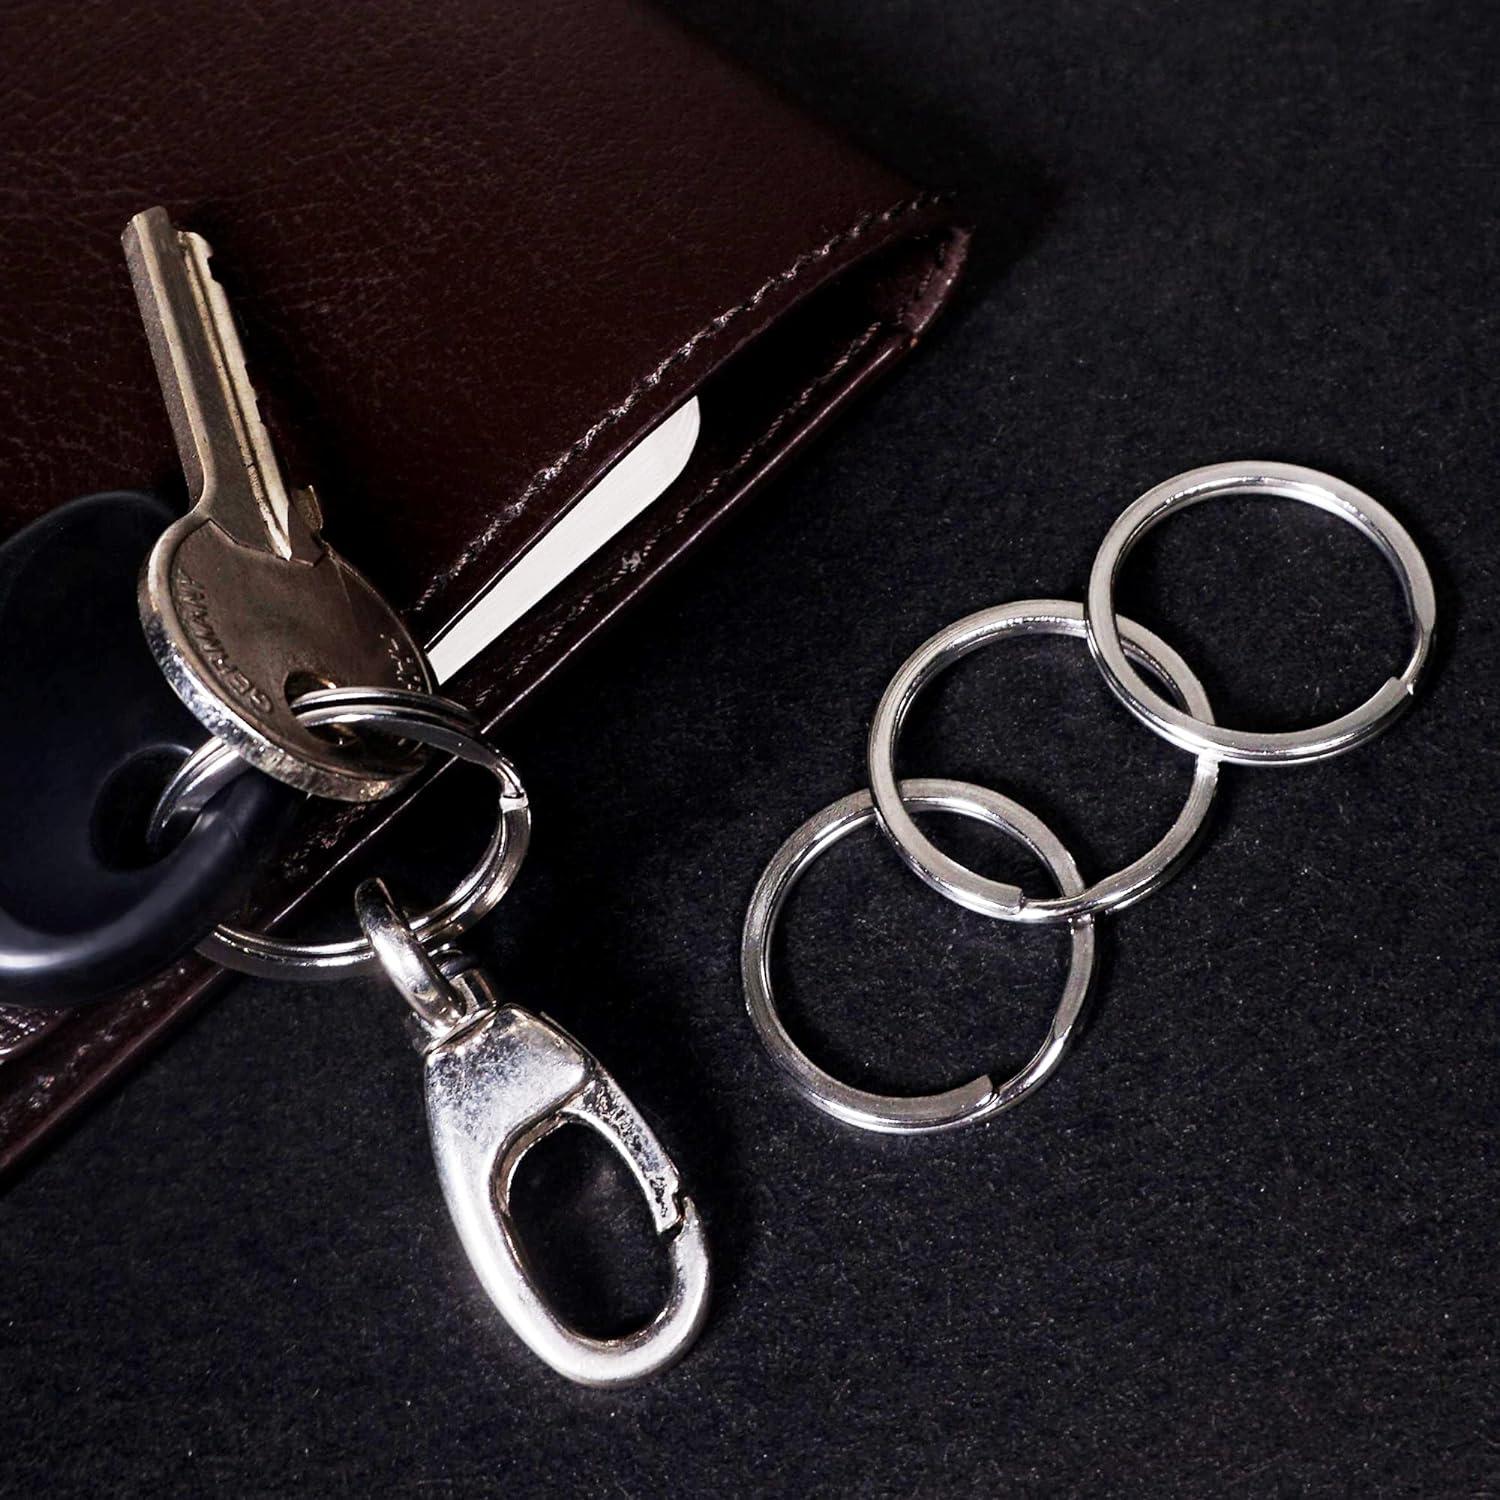 Key Rings - Split Key Ring for Keychains - 100 Pcs 1inch, 25mm Key Chains  Rings for Crafts Home Car Keys